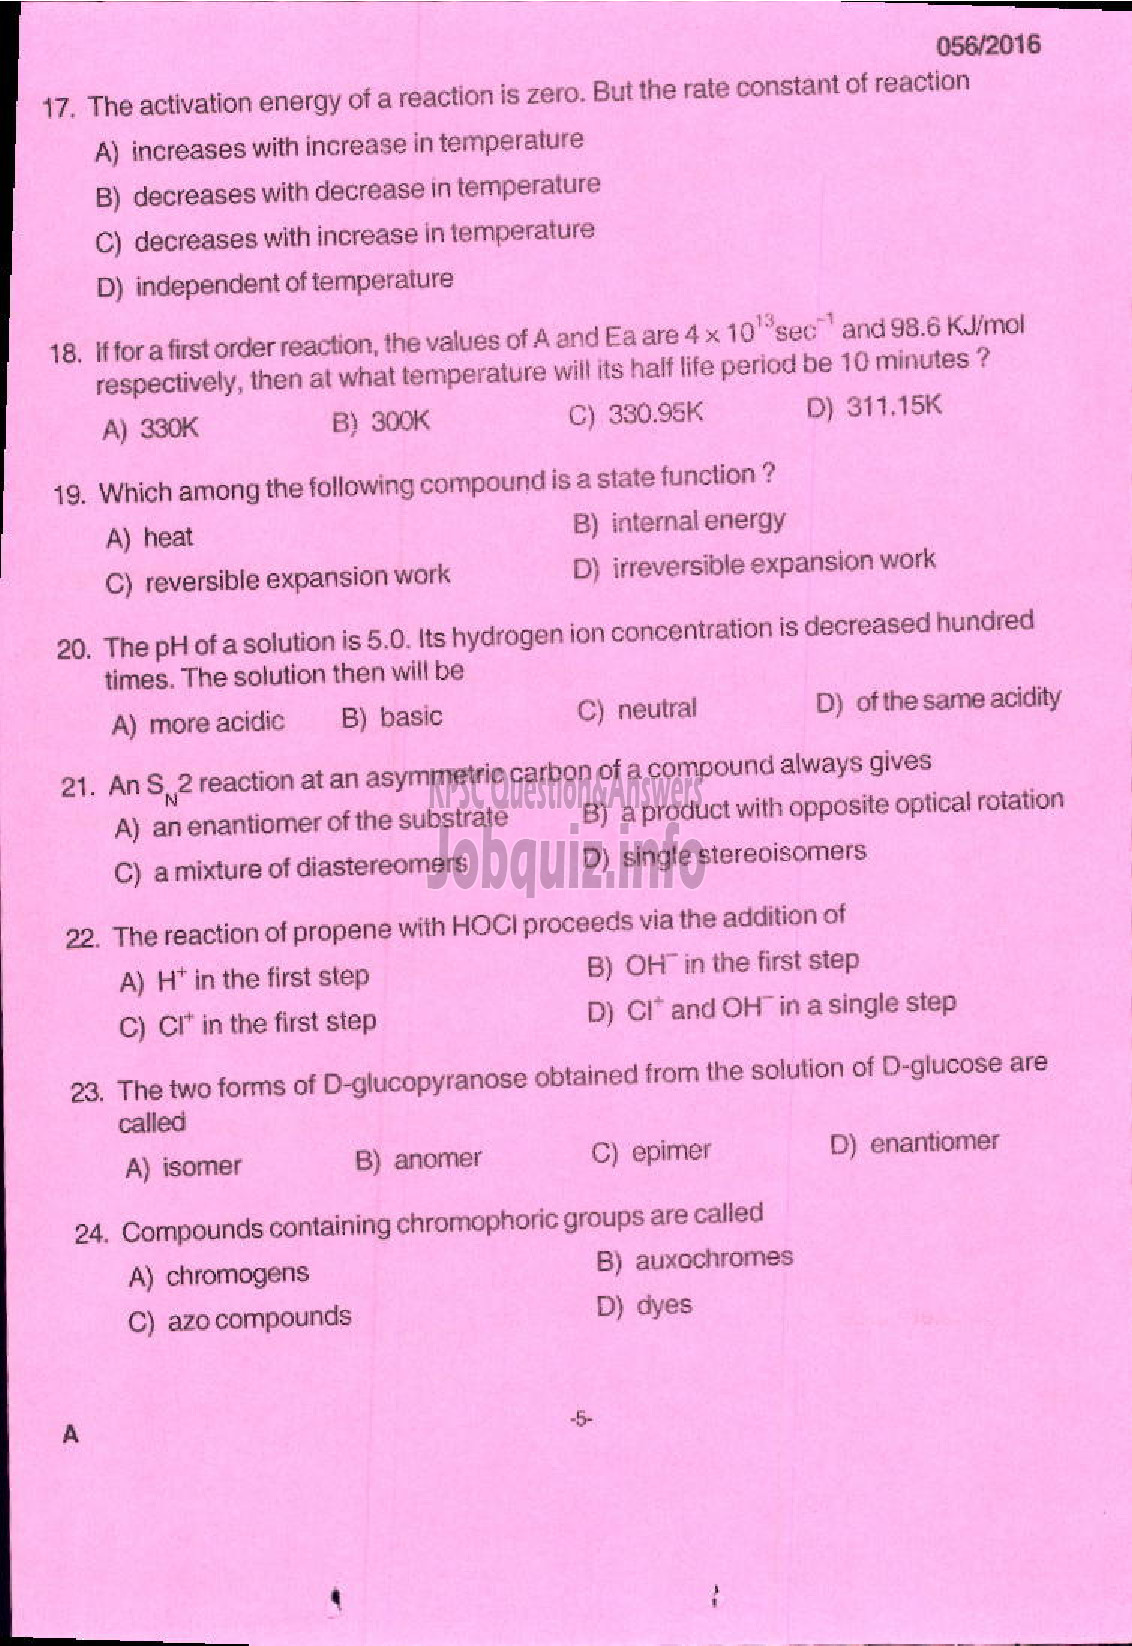 Kerala PSC Question Paper - OTHER RESEARCH ASSISTANT CHEMISTRY FISHERIES-3